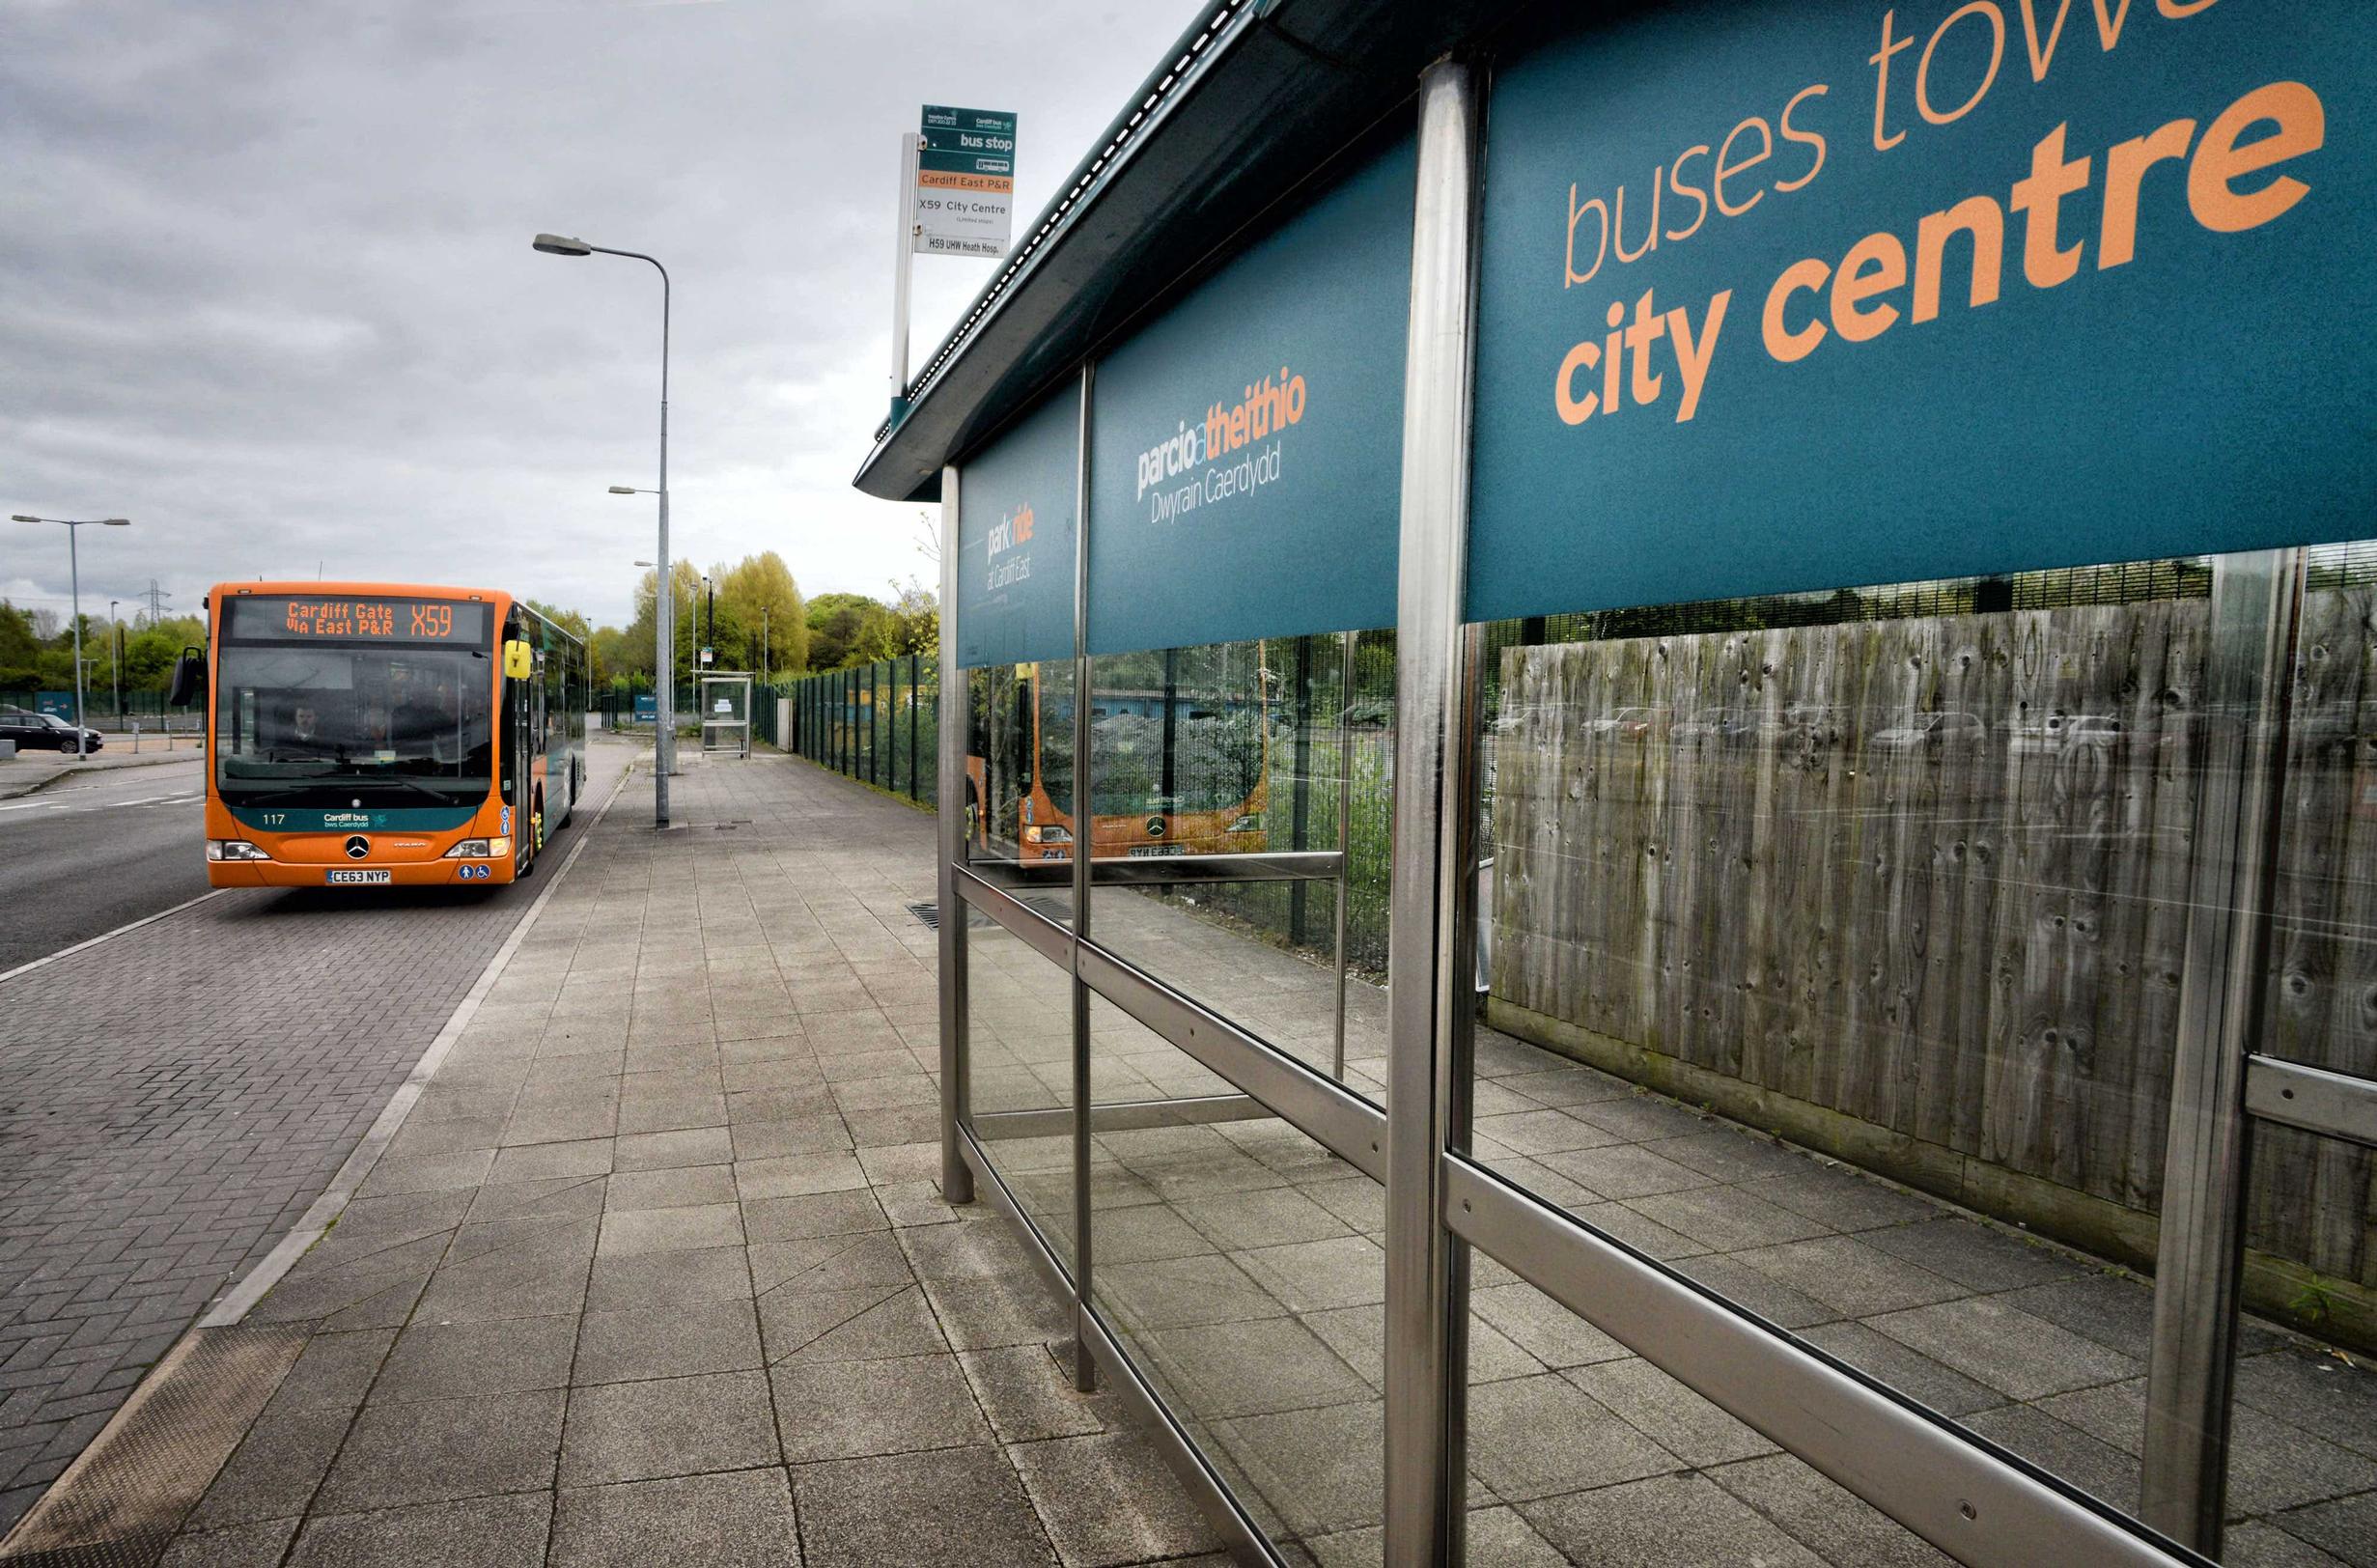 Cardiff East had spartan facilities in 2018 and since then has lost its buses to the city centre, but better facilities are promised with the site’s redevelopment